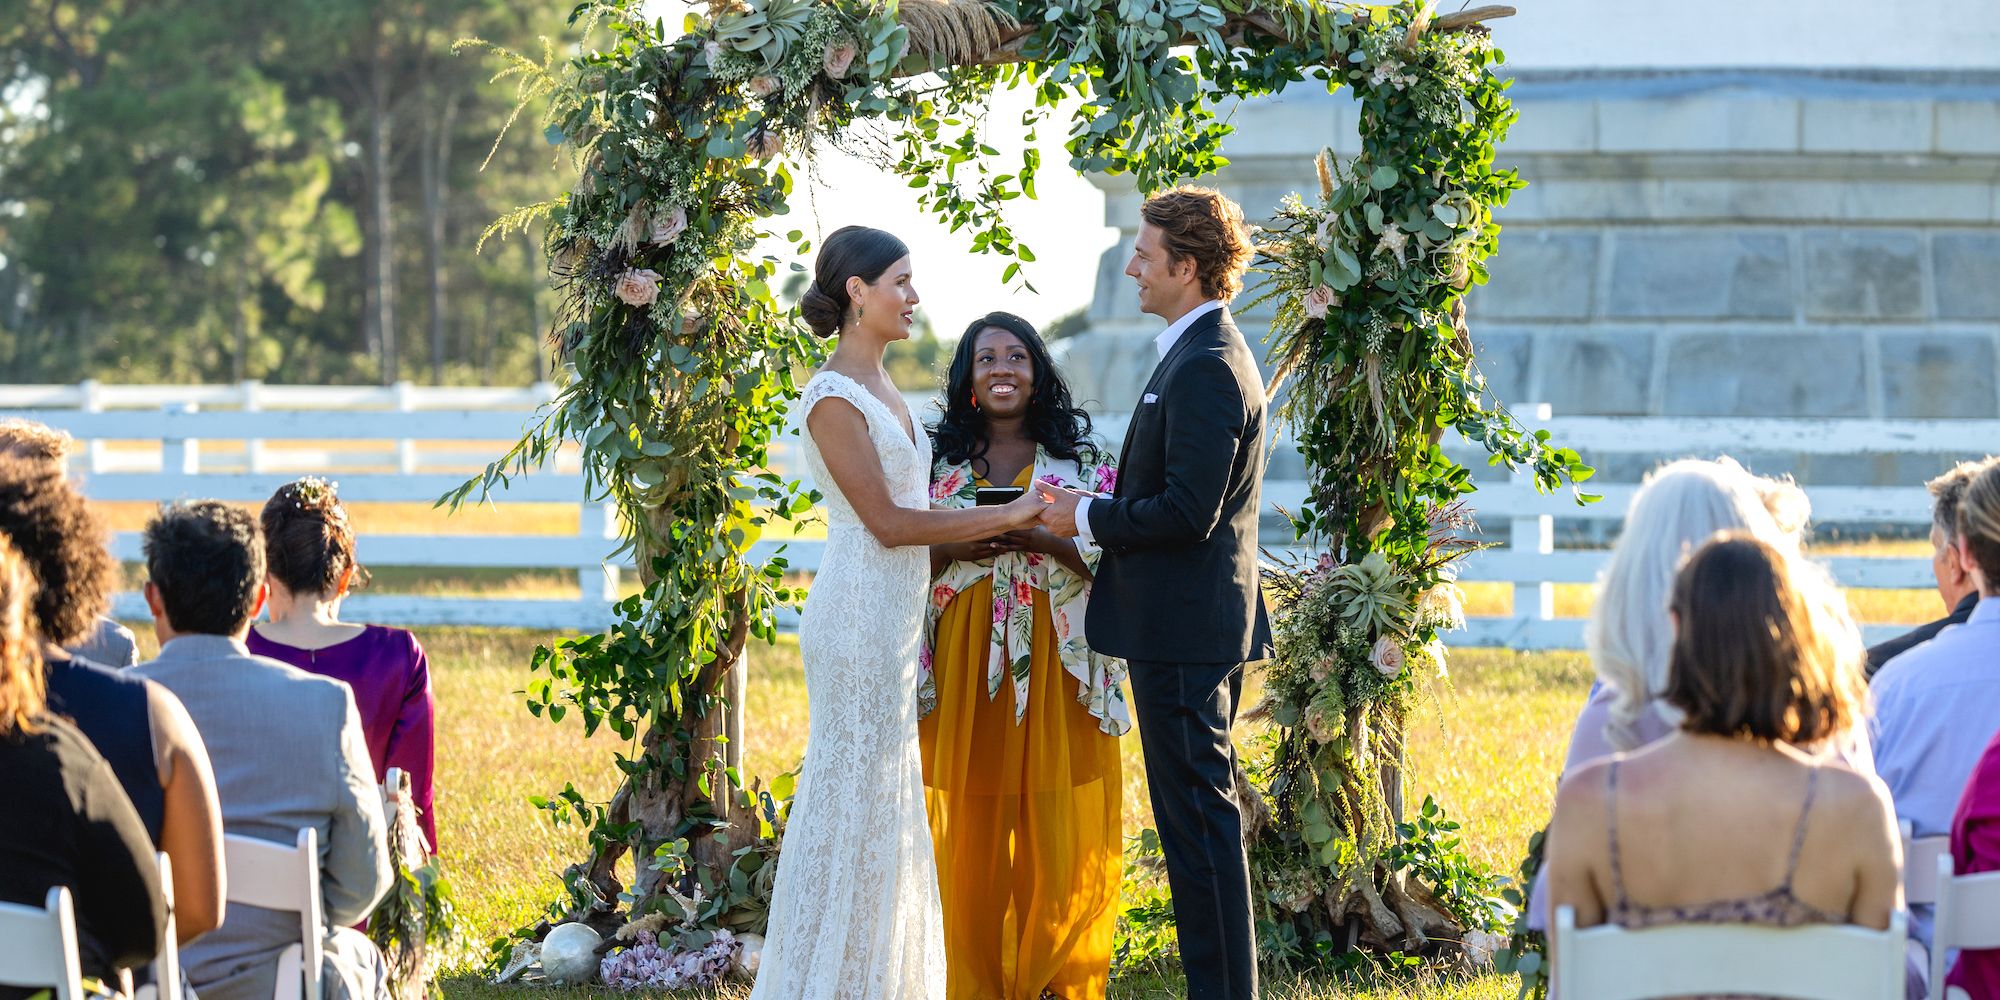 Phillipa Soo and Luke Bracey at the wedding altar in One True Loves